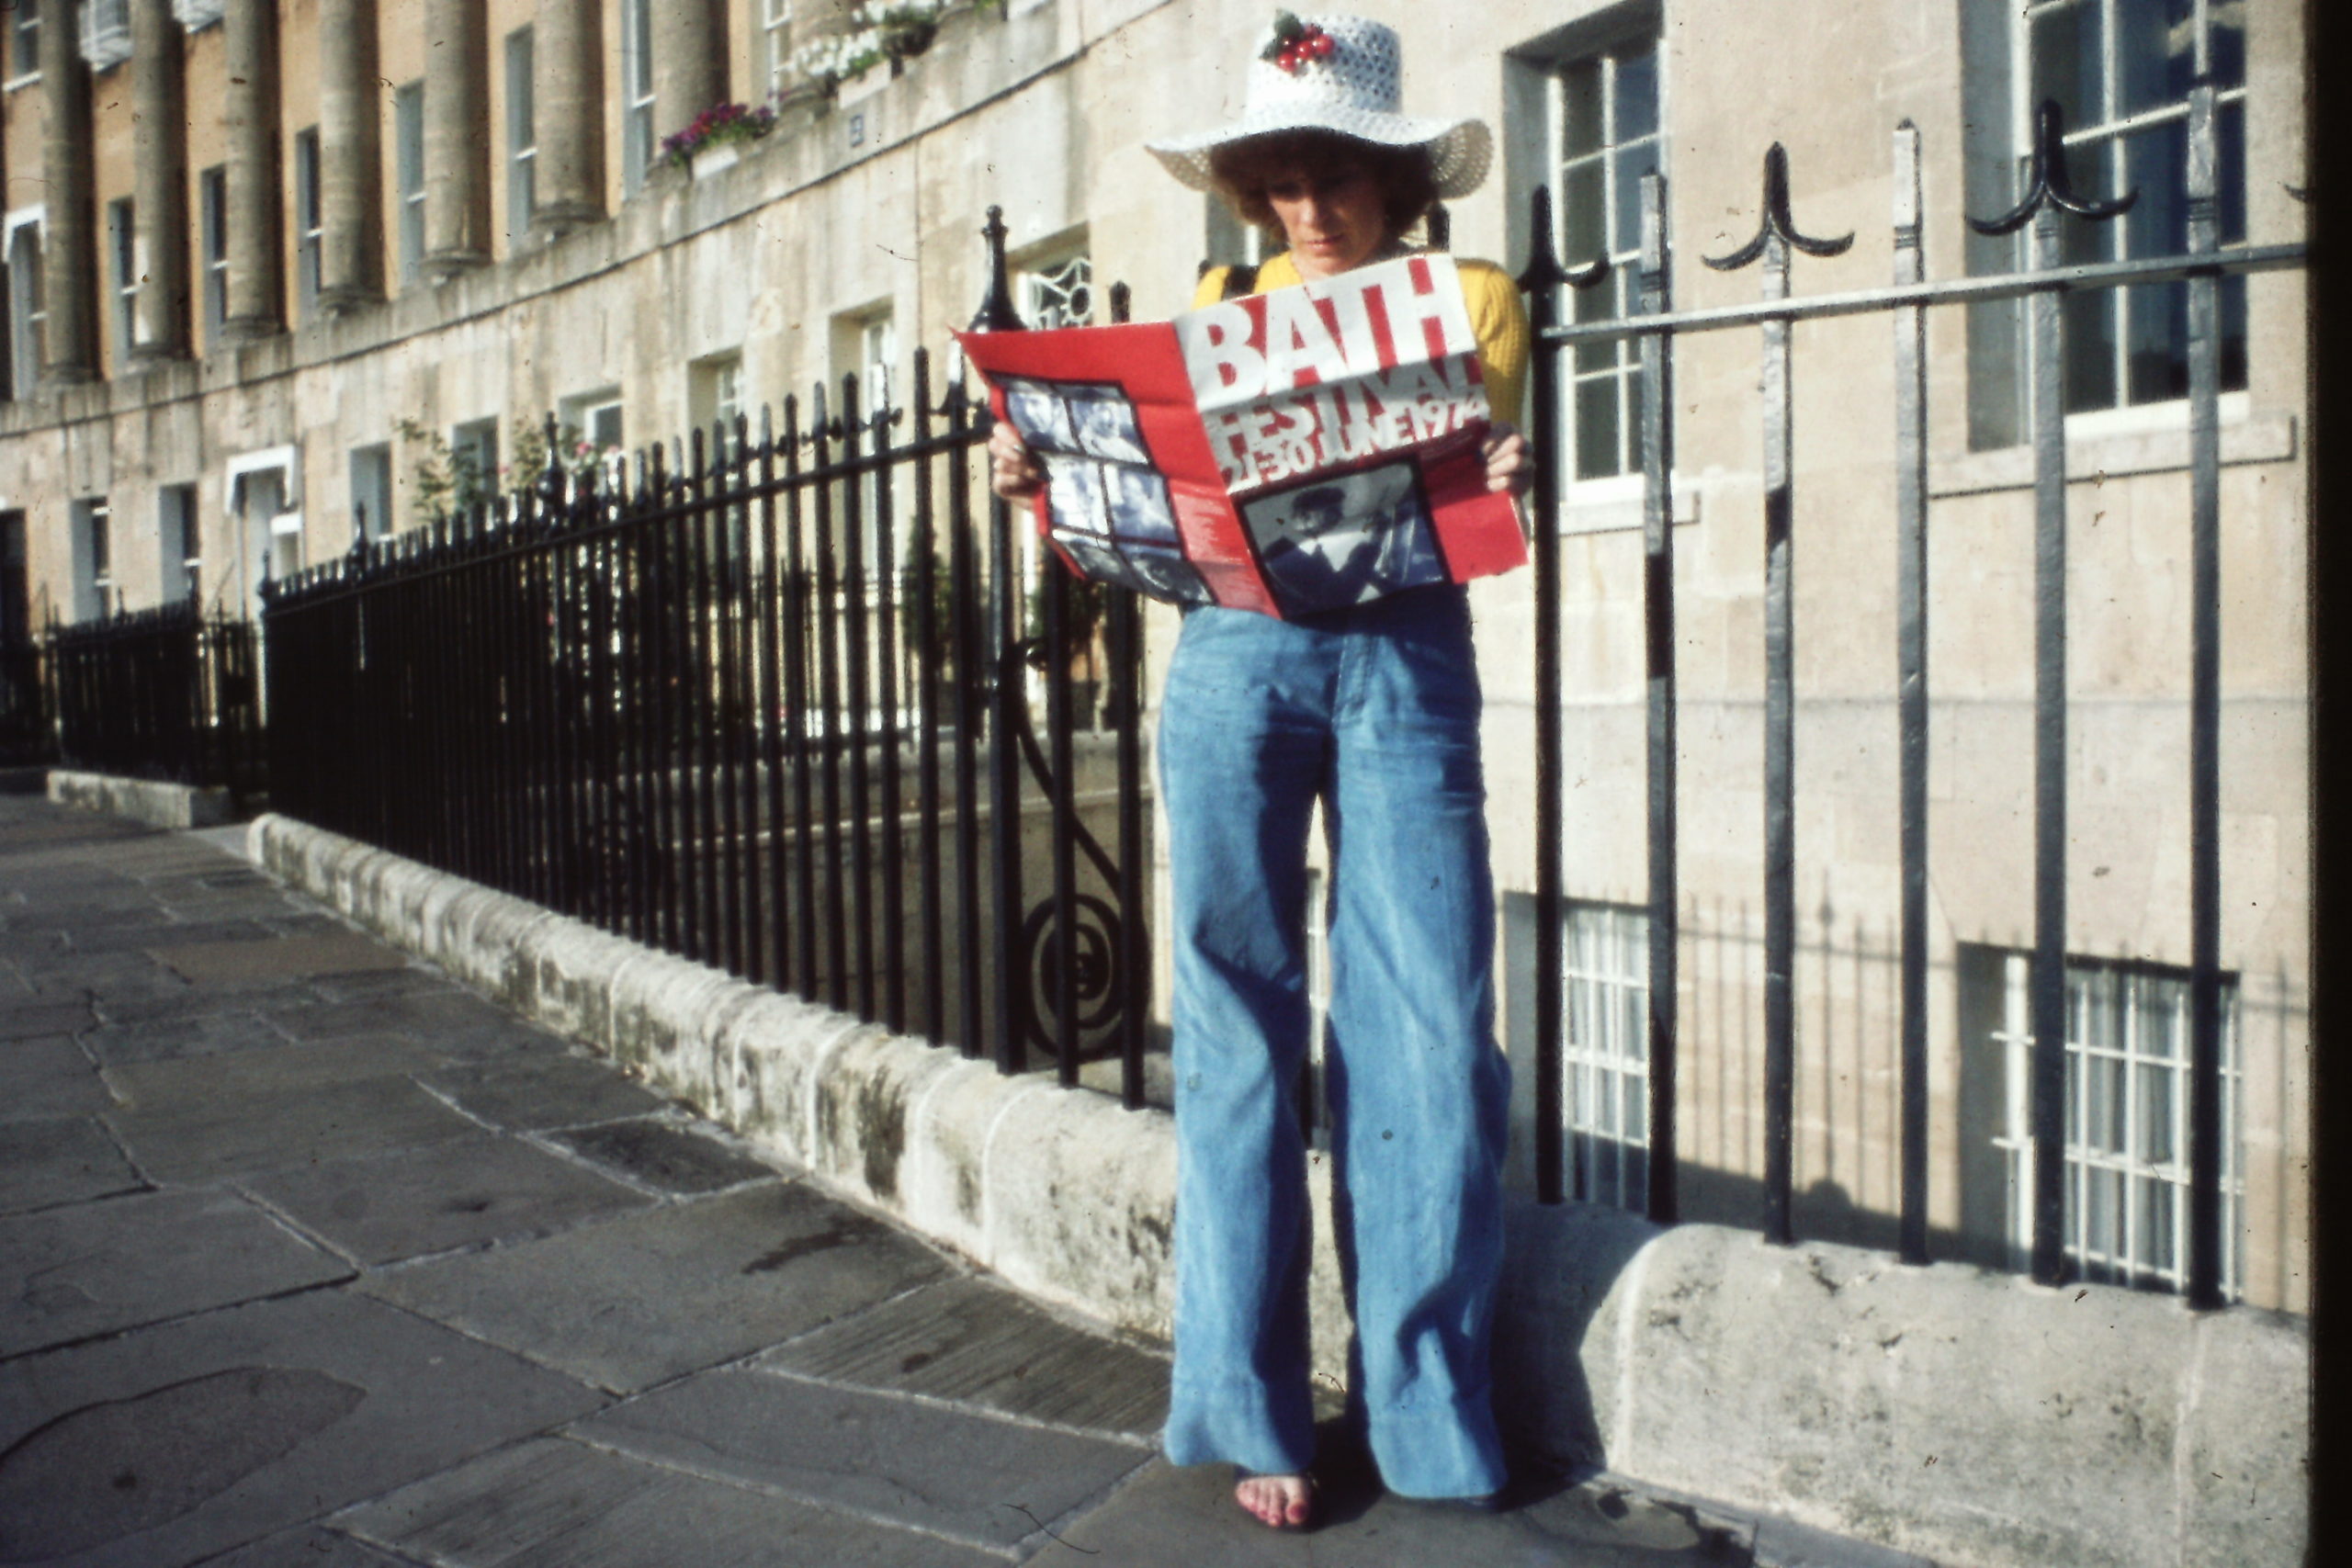 Lady stood outside the Royal Crescent reading a Bath Festival programme from 1974